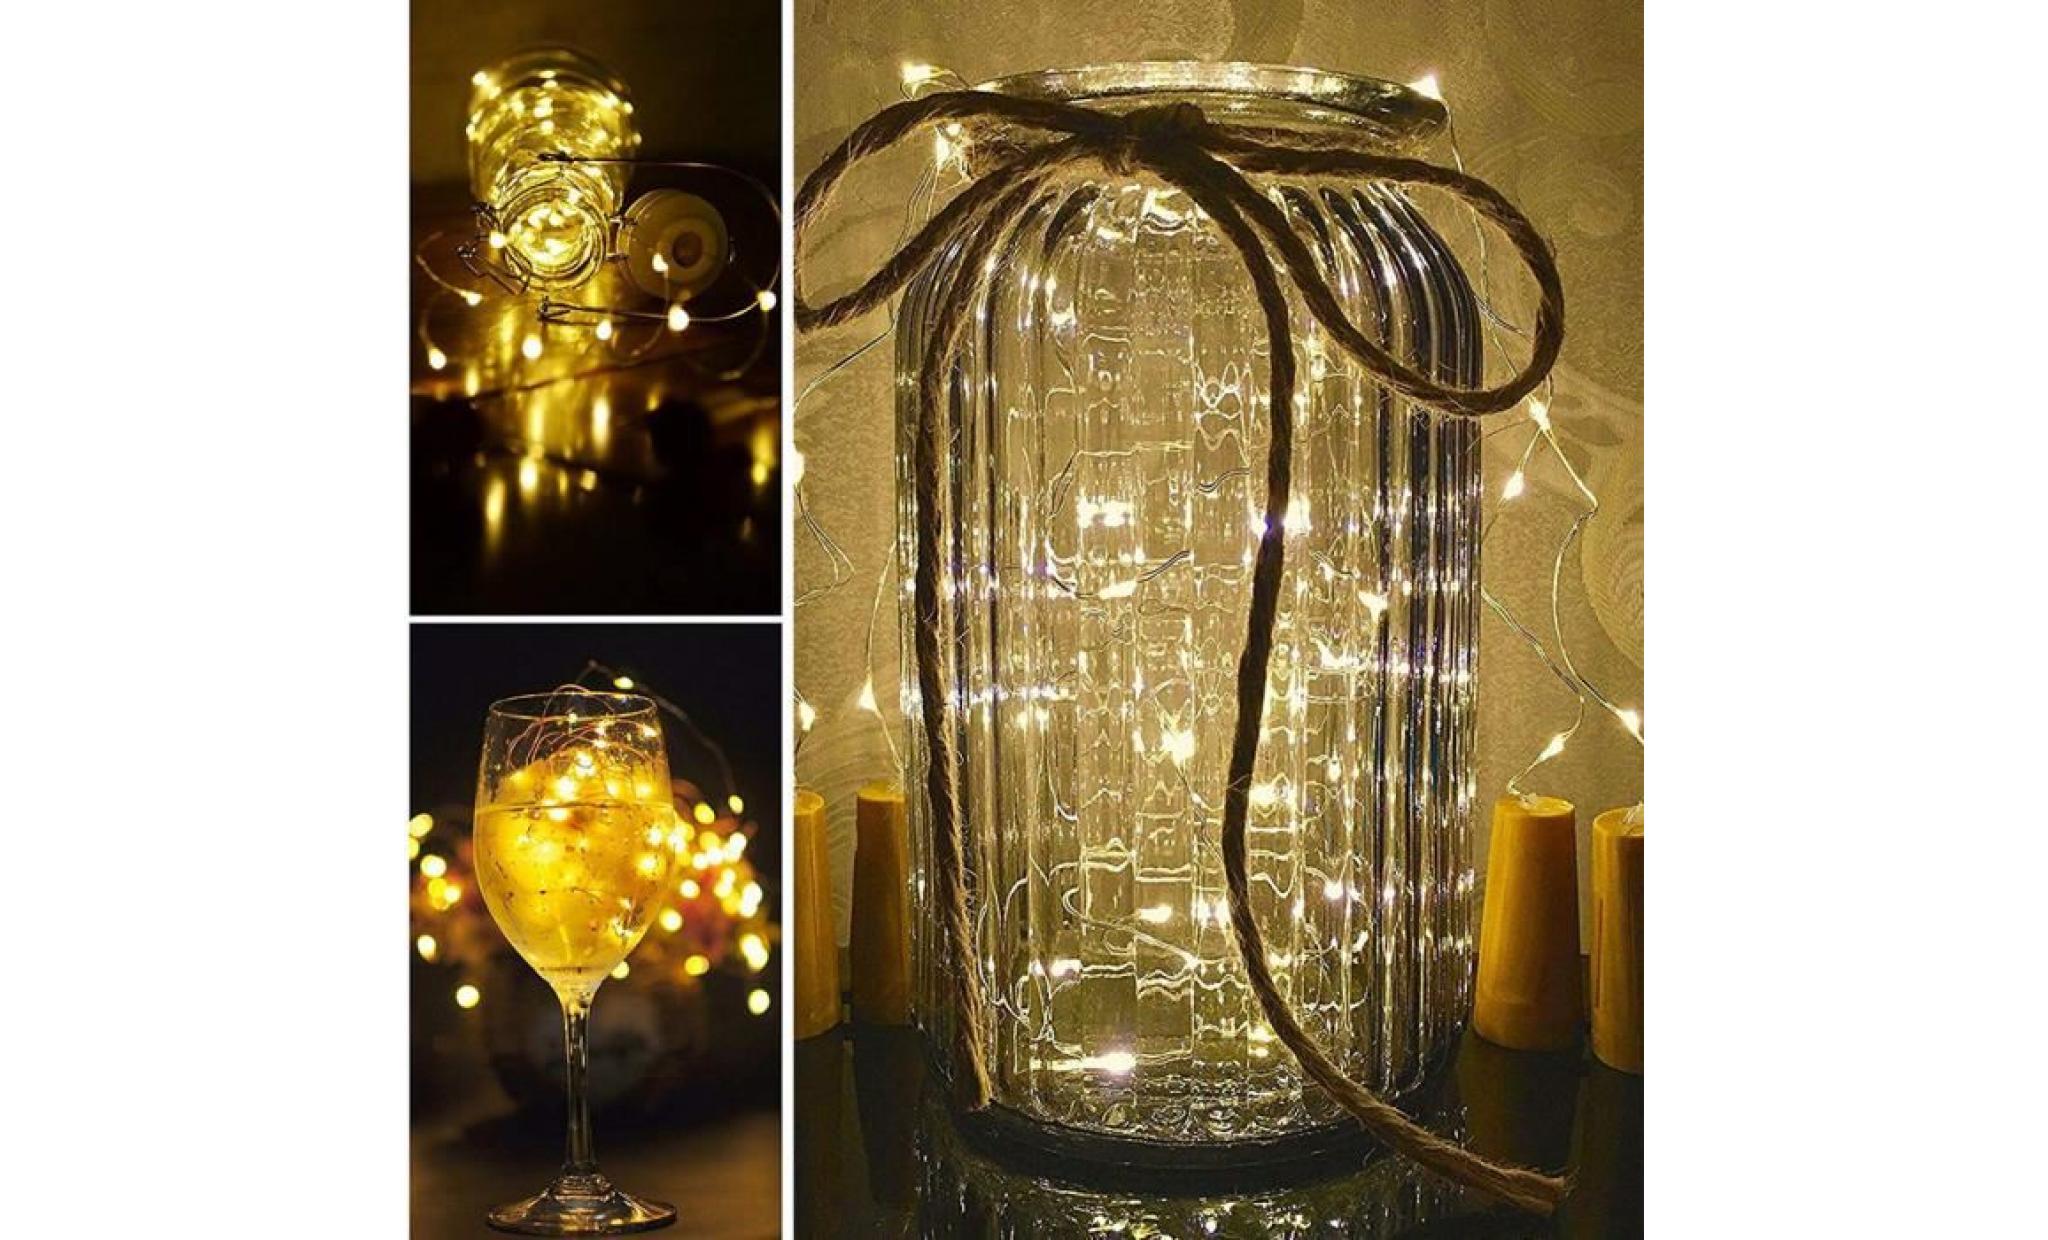 8pcs cork shaped led night starry light wine bottle lamp for party decor yellow pageare3365 pageare3365 pas cher